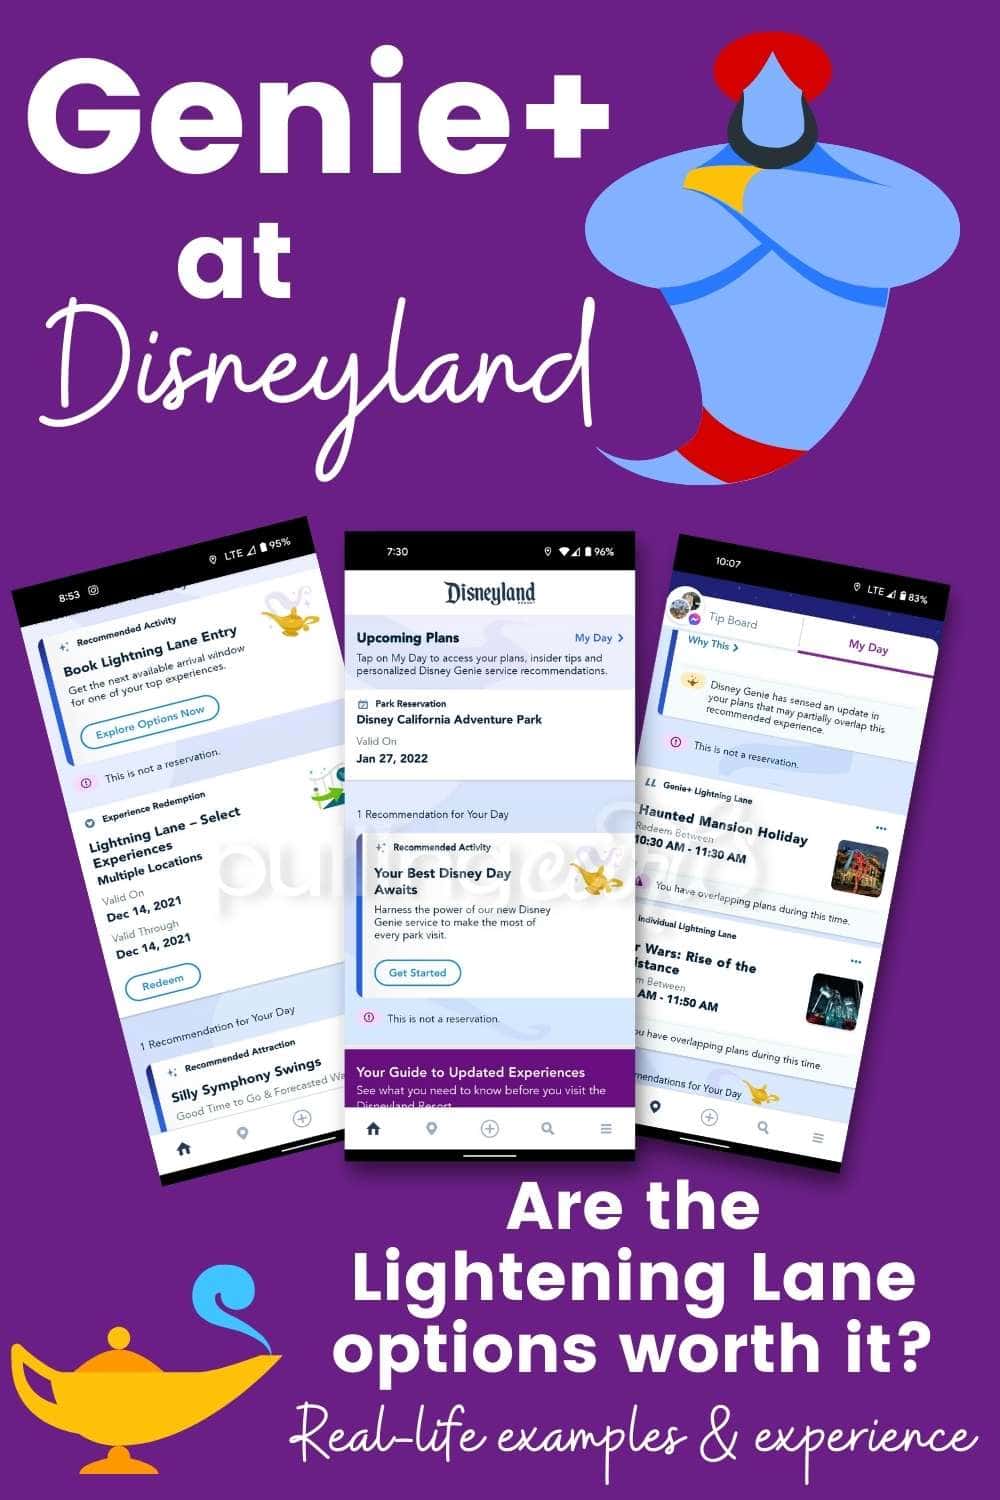 Genie Plus is a new helper at Disneyland. It is aimed to help families utilize the park better during their stay. You can also purchase Genie Plus and use it to "skip the line" using the lightening lane for a few attractions. Today we will share some tips to decide if it's right for you and to use it well if you purchase the Genie+ add-on. via @pullingcurls